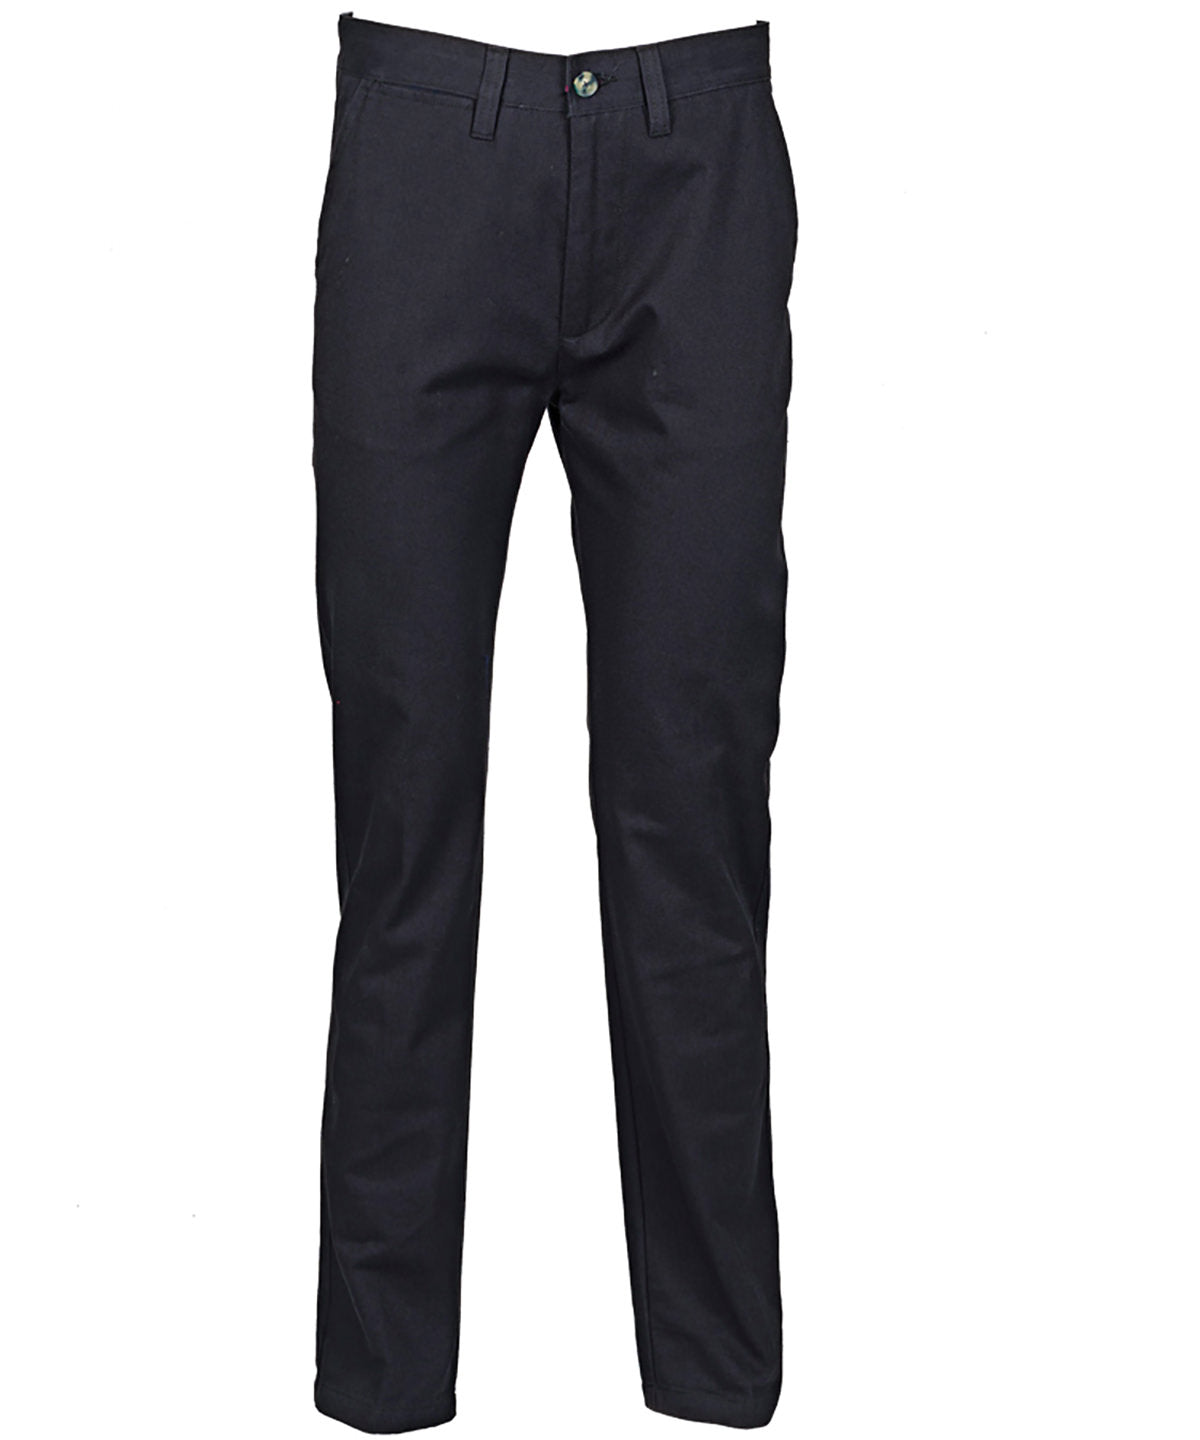 Personalised Trousers - Black Henbury 65/35 flat fronted chino trousers